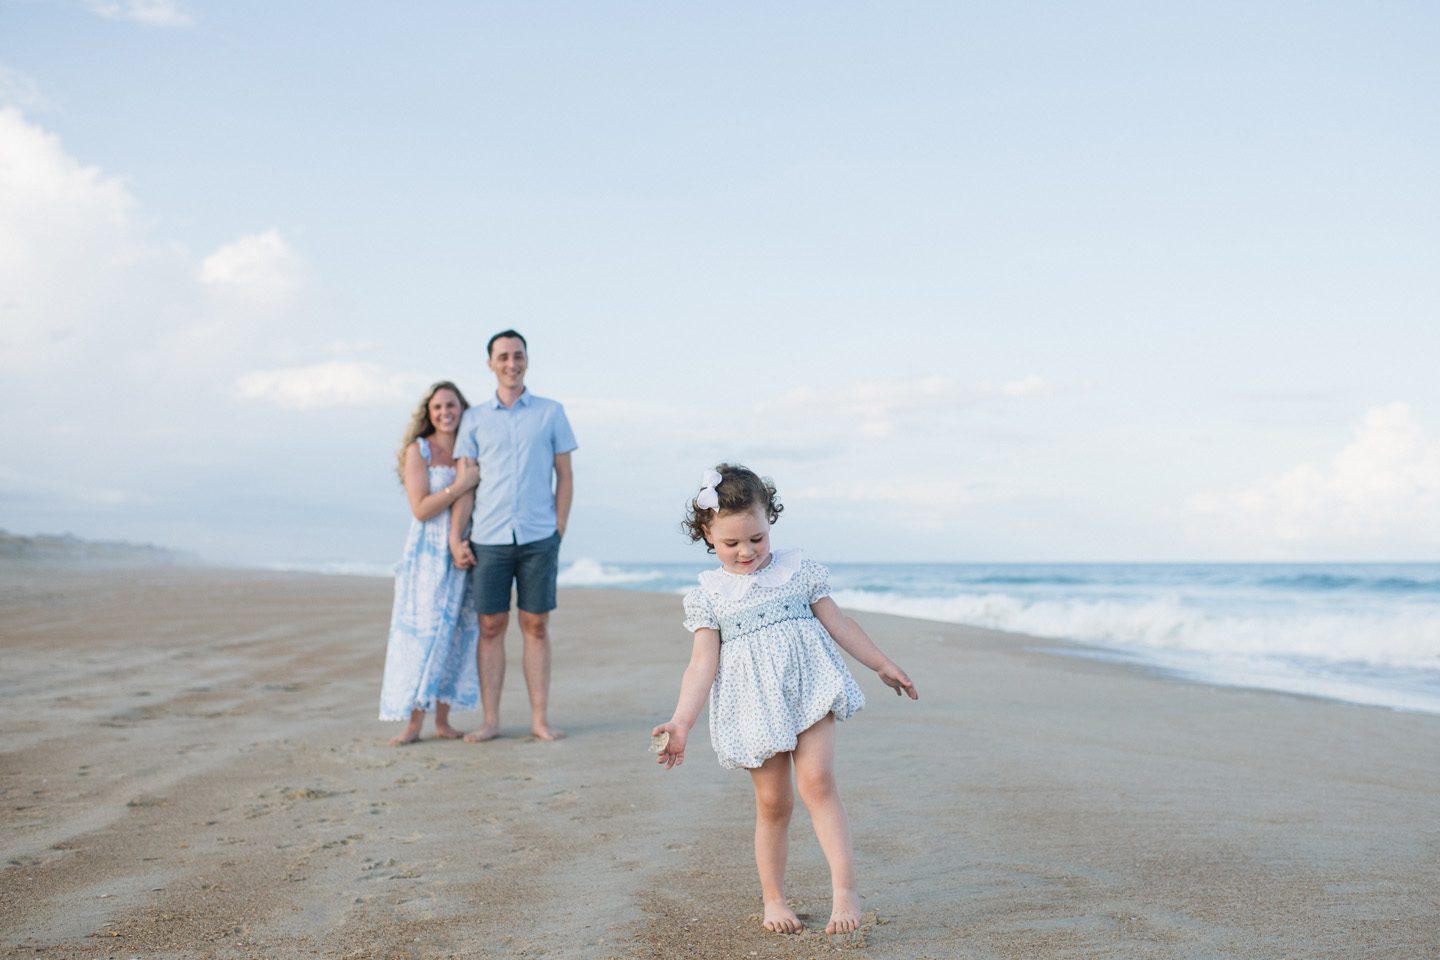 Nags Head portraits, fun family portrait sessions on the beach